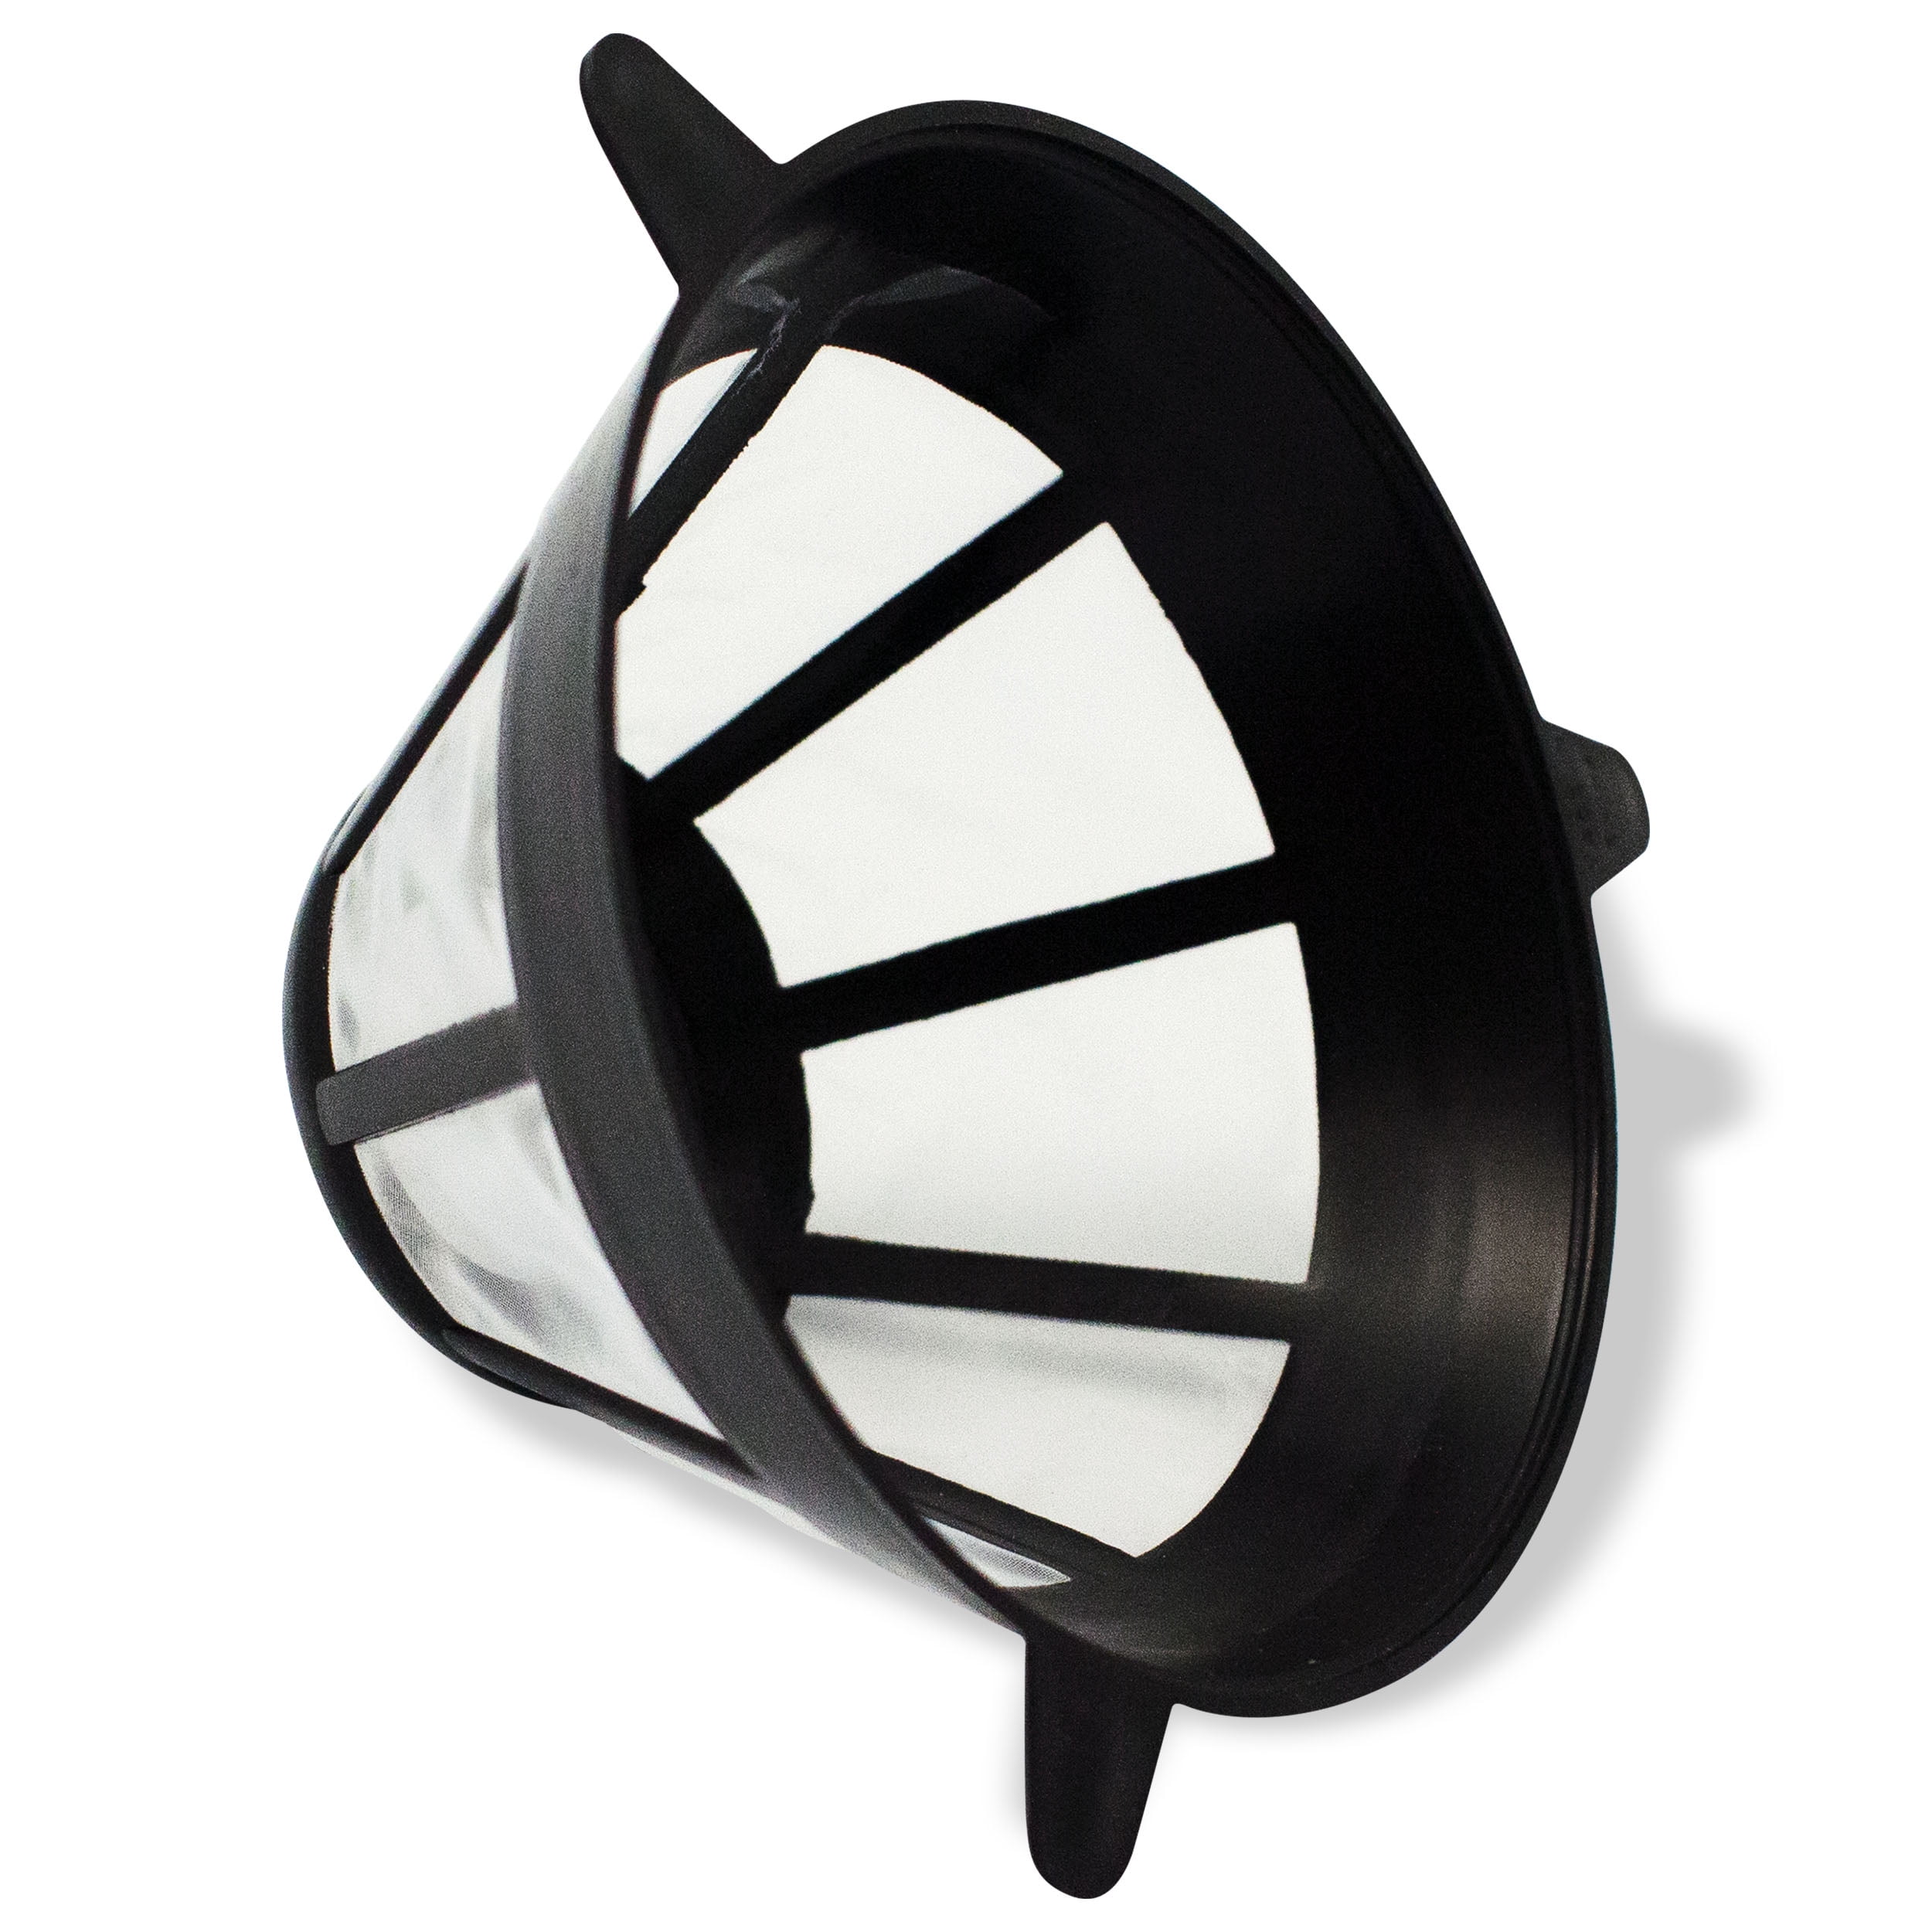 Save on Fill 'n Brew Reuseable Coffee Filter Order Online Delivery